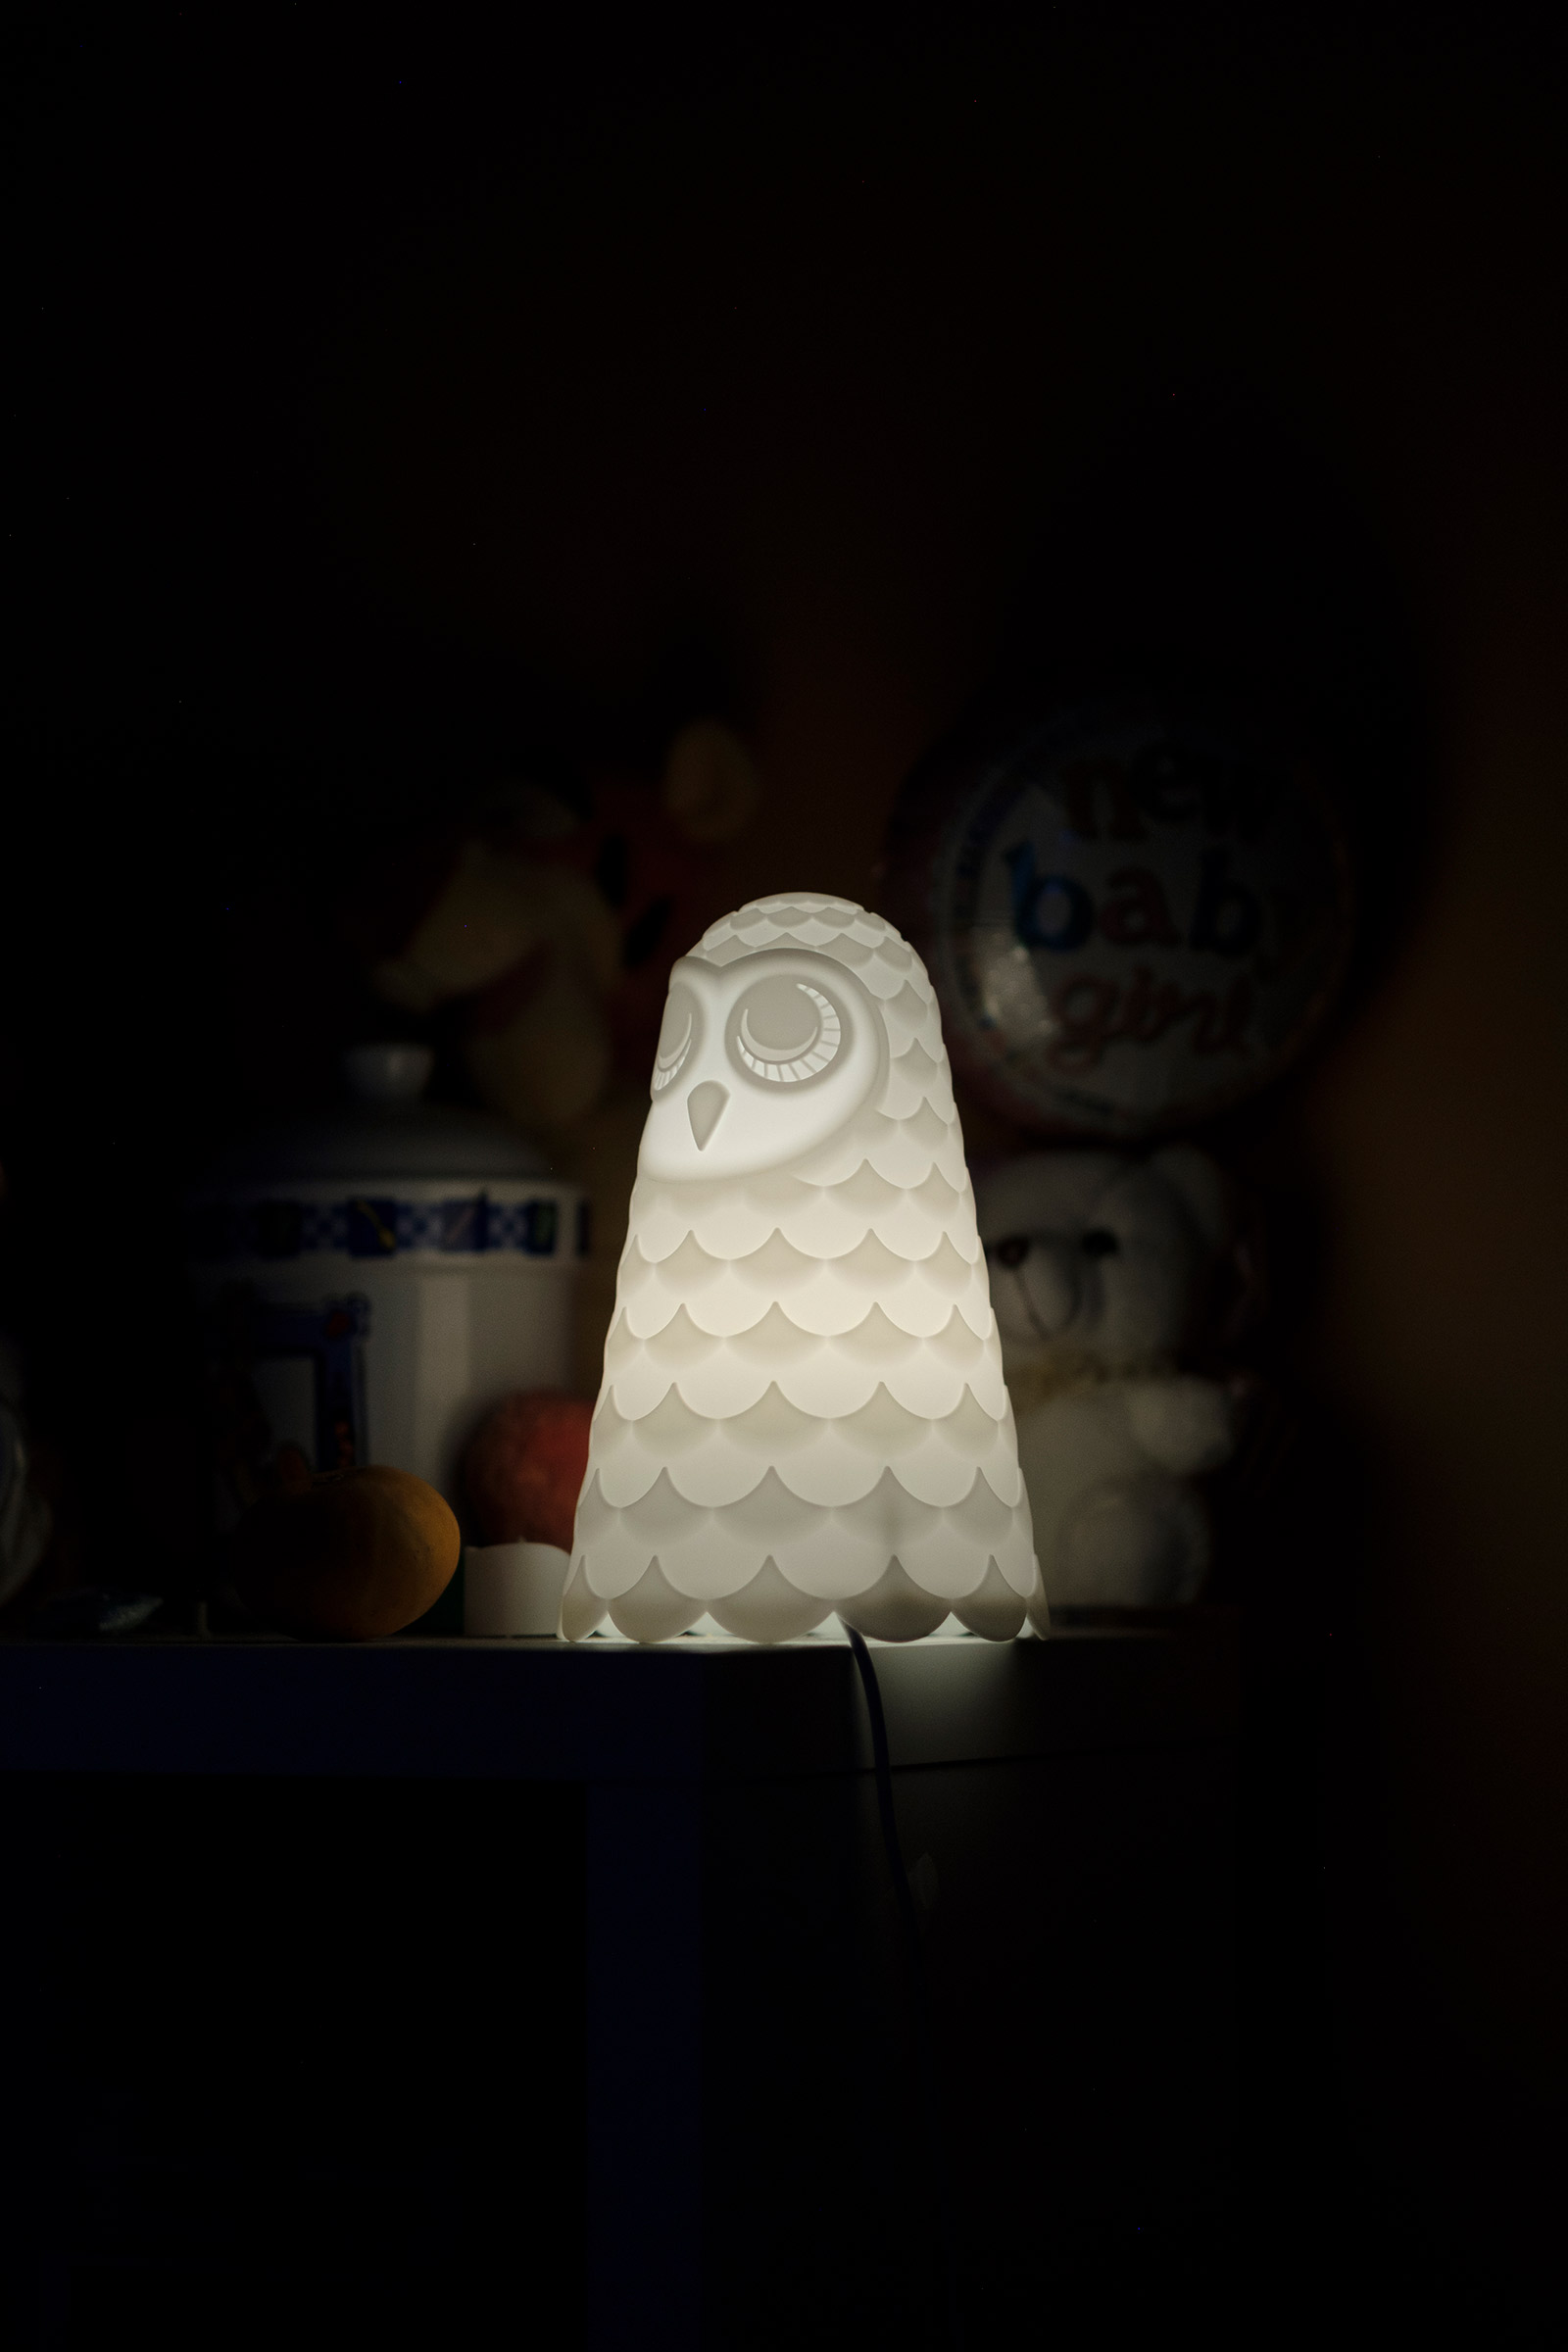 An owl-shaped lamp in Elsie Addison’s bedroom. Elsie’s father, Martin, used to turn off the light at night before he passed away from COVID-19. Since he passed, Elsie keeps the light on at all times. Waldick, New Jersey, 2021 © Sean Sirota for Time Magazine